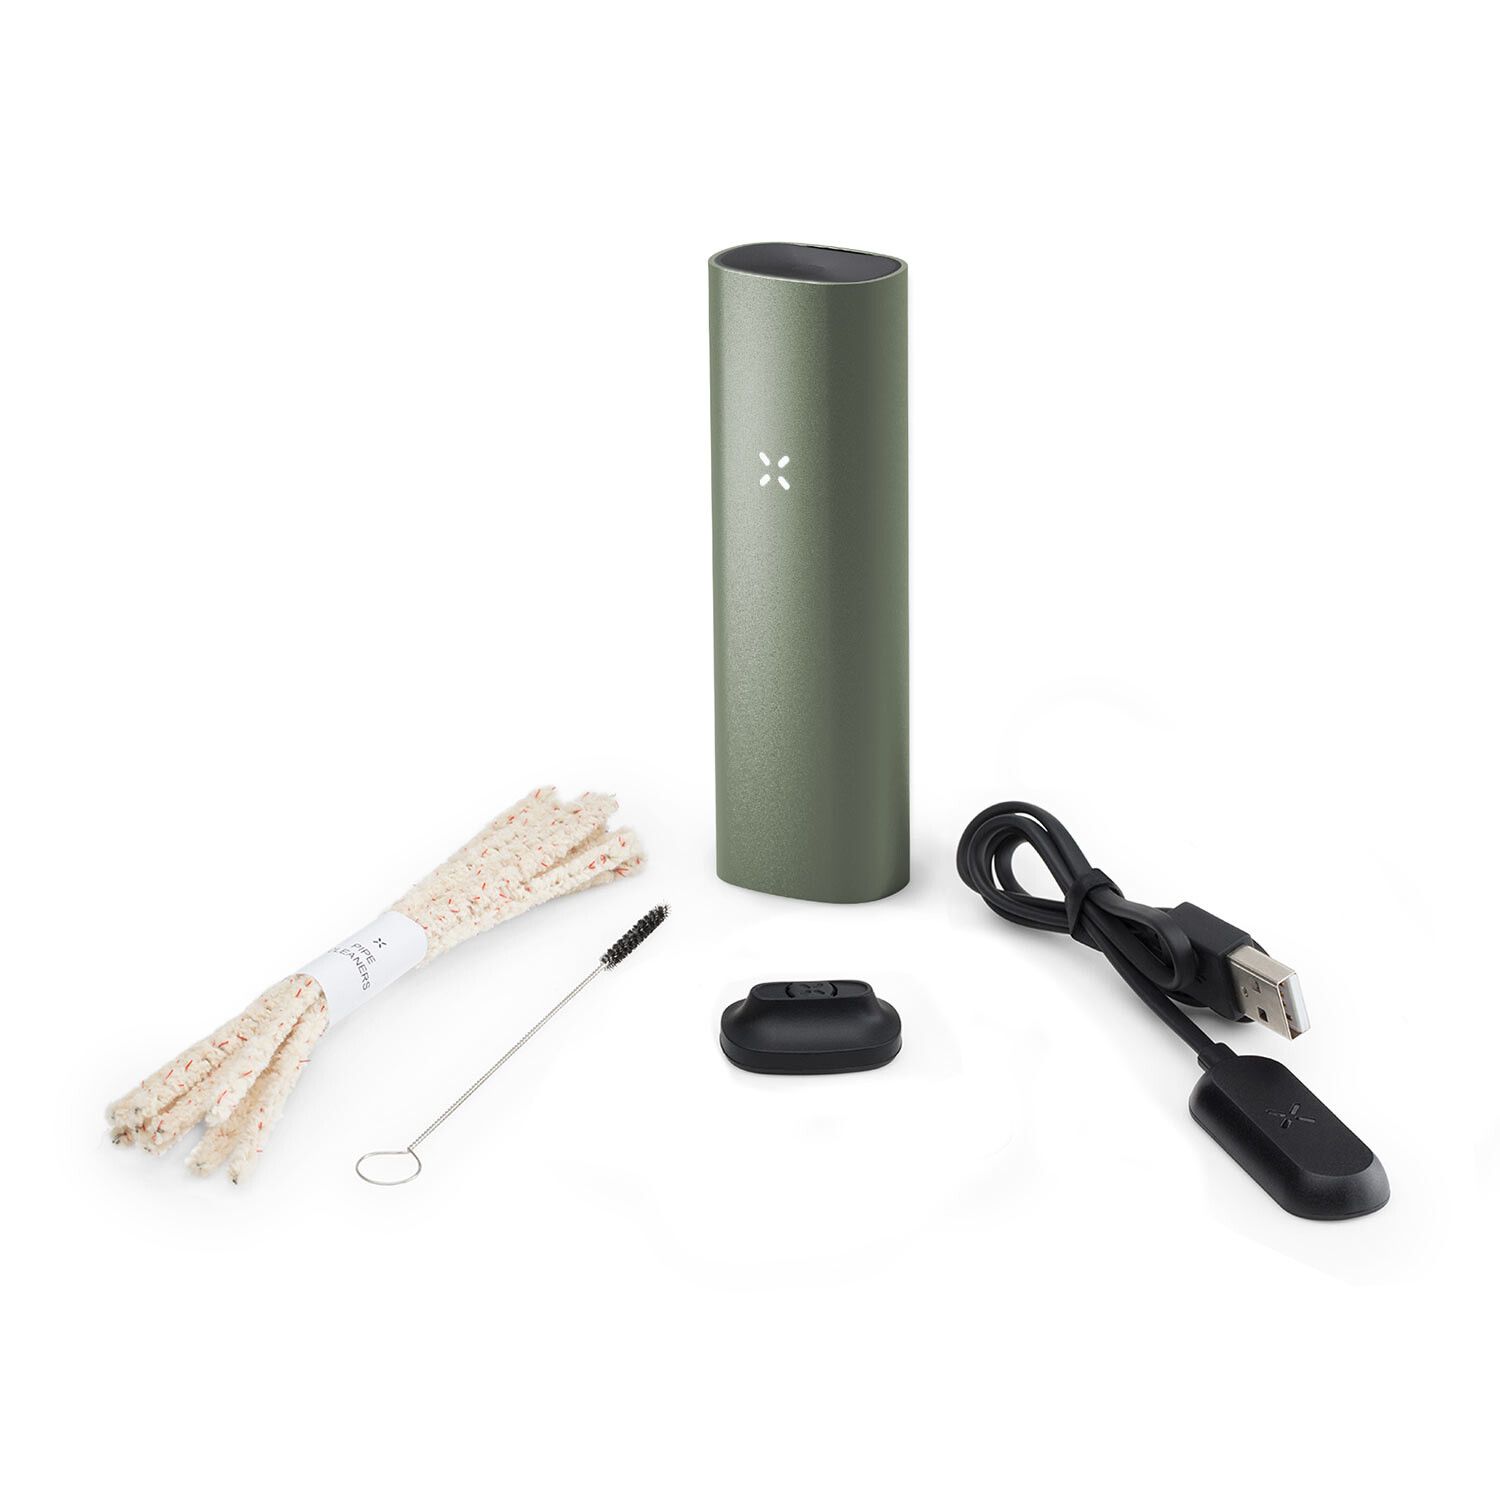 Pax 3 Device Only - Sage